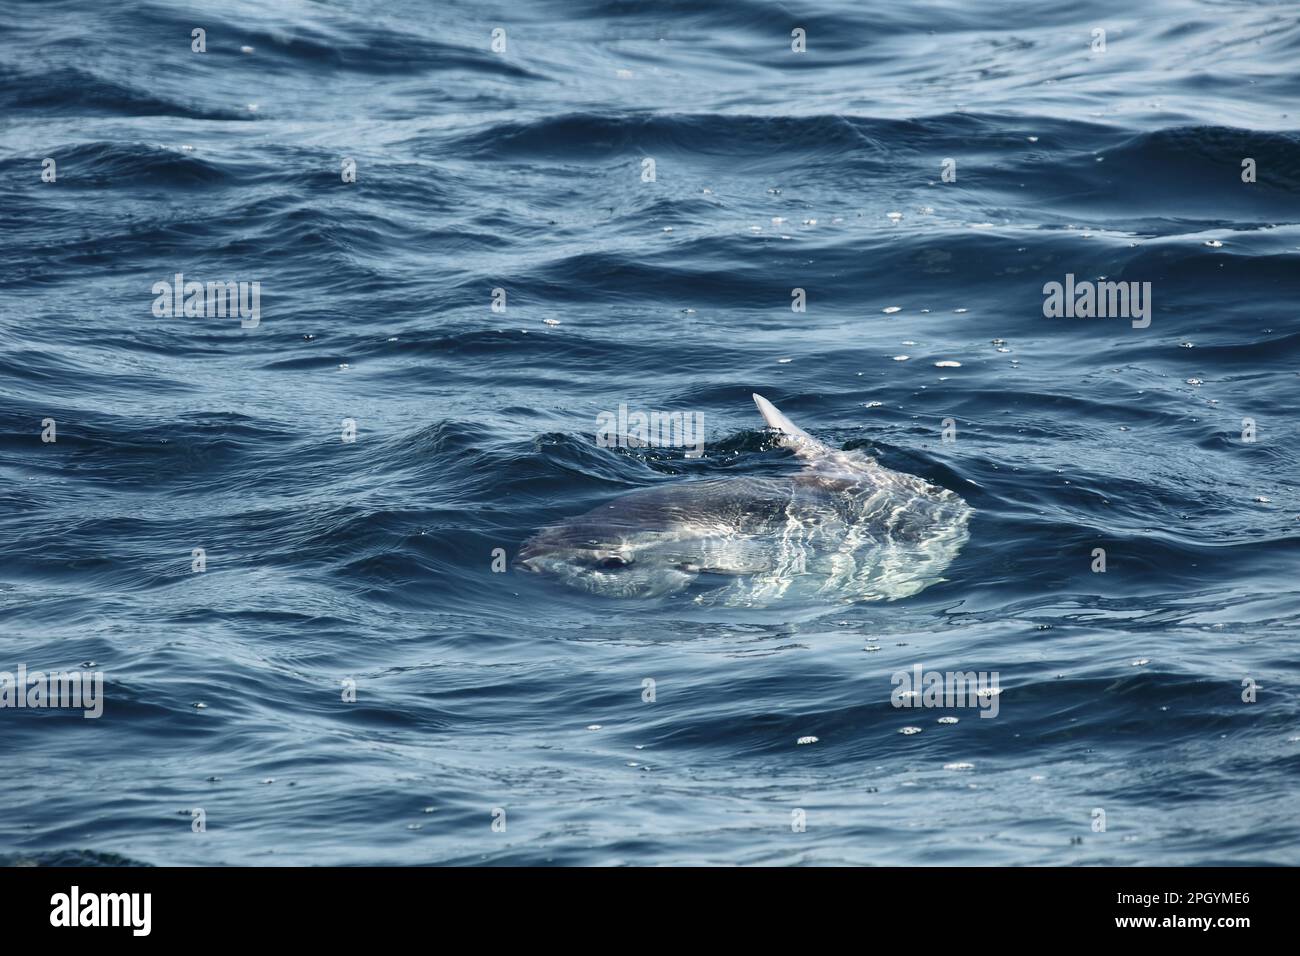 Ocean Sunfish (Mola mola) adult, swimming with dorsal fin at surface of water, Penzance, Cornwall, England, United Kingdom Stock Photo